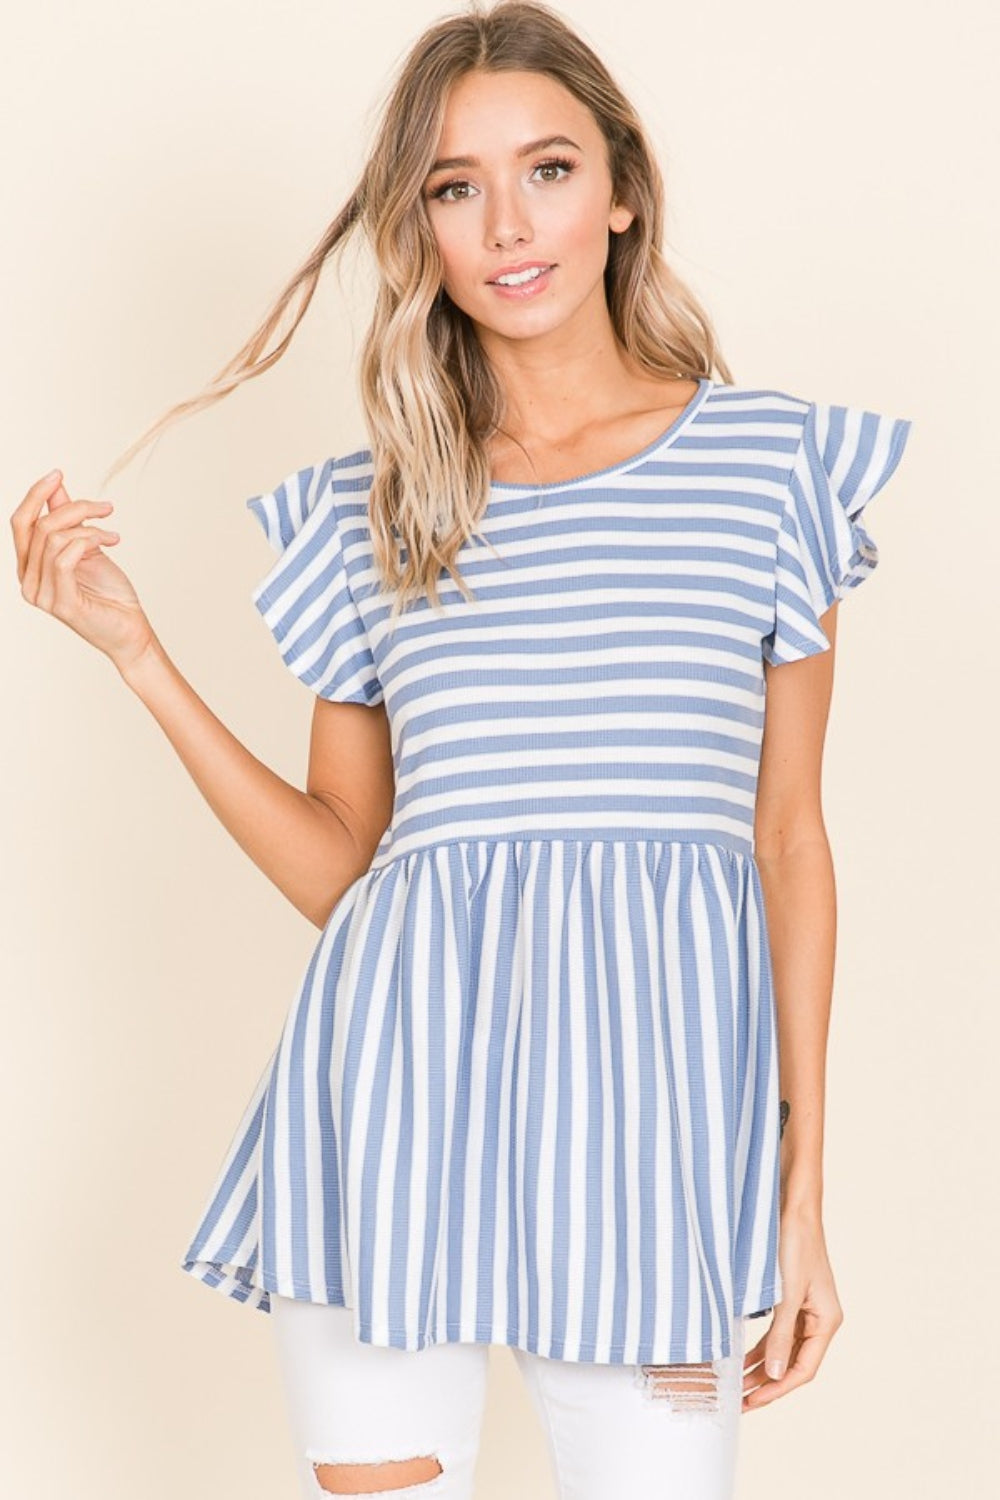 Classic Striped Blouse - Work to Weekend Style Blue